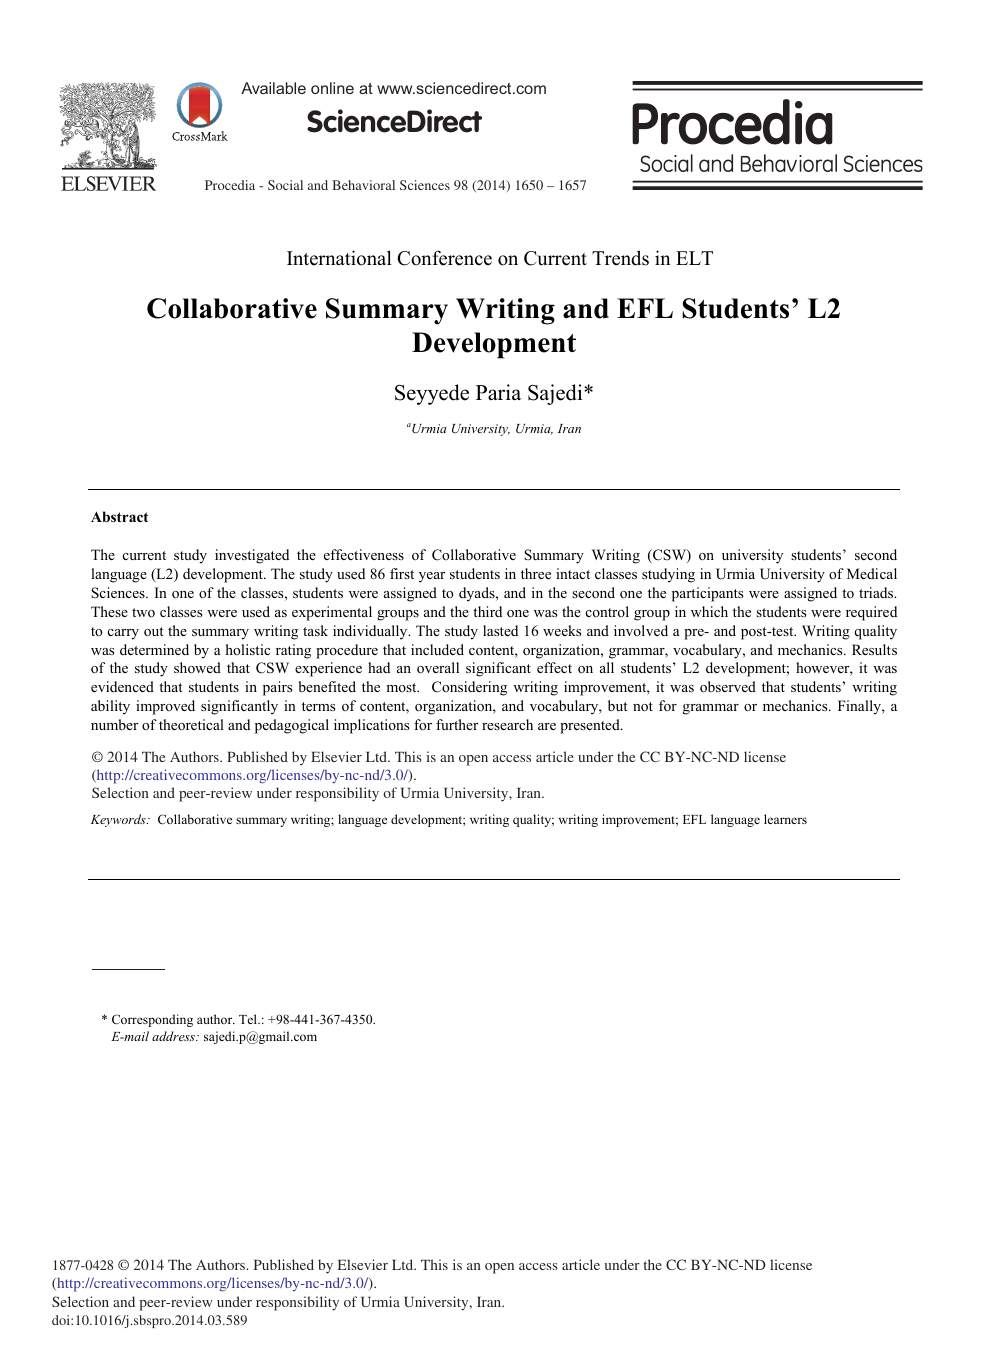 Collaborative Summary Writing And Efl Students L2 Development Topic Of Research Paper In Languages And Literature Download Scholarly Article Pdf And Read For Free On Cyberleninka Open Science Hub